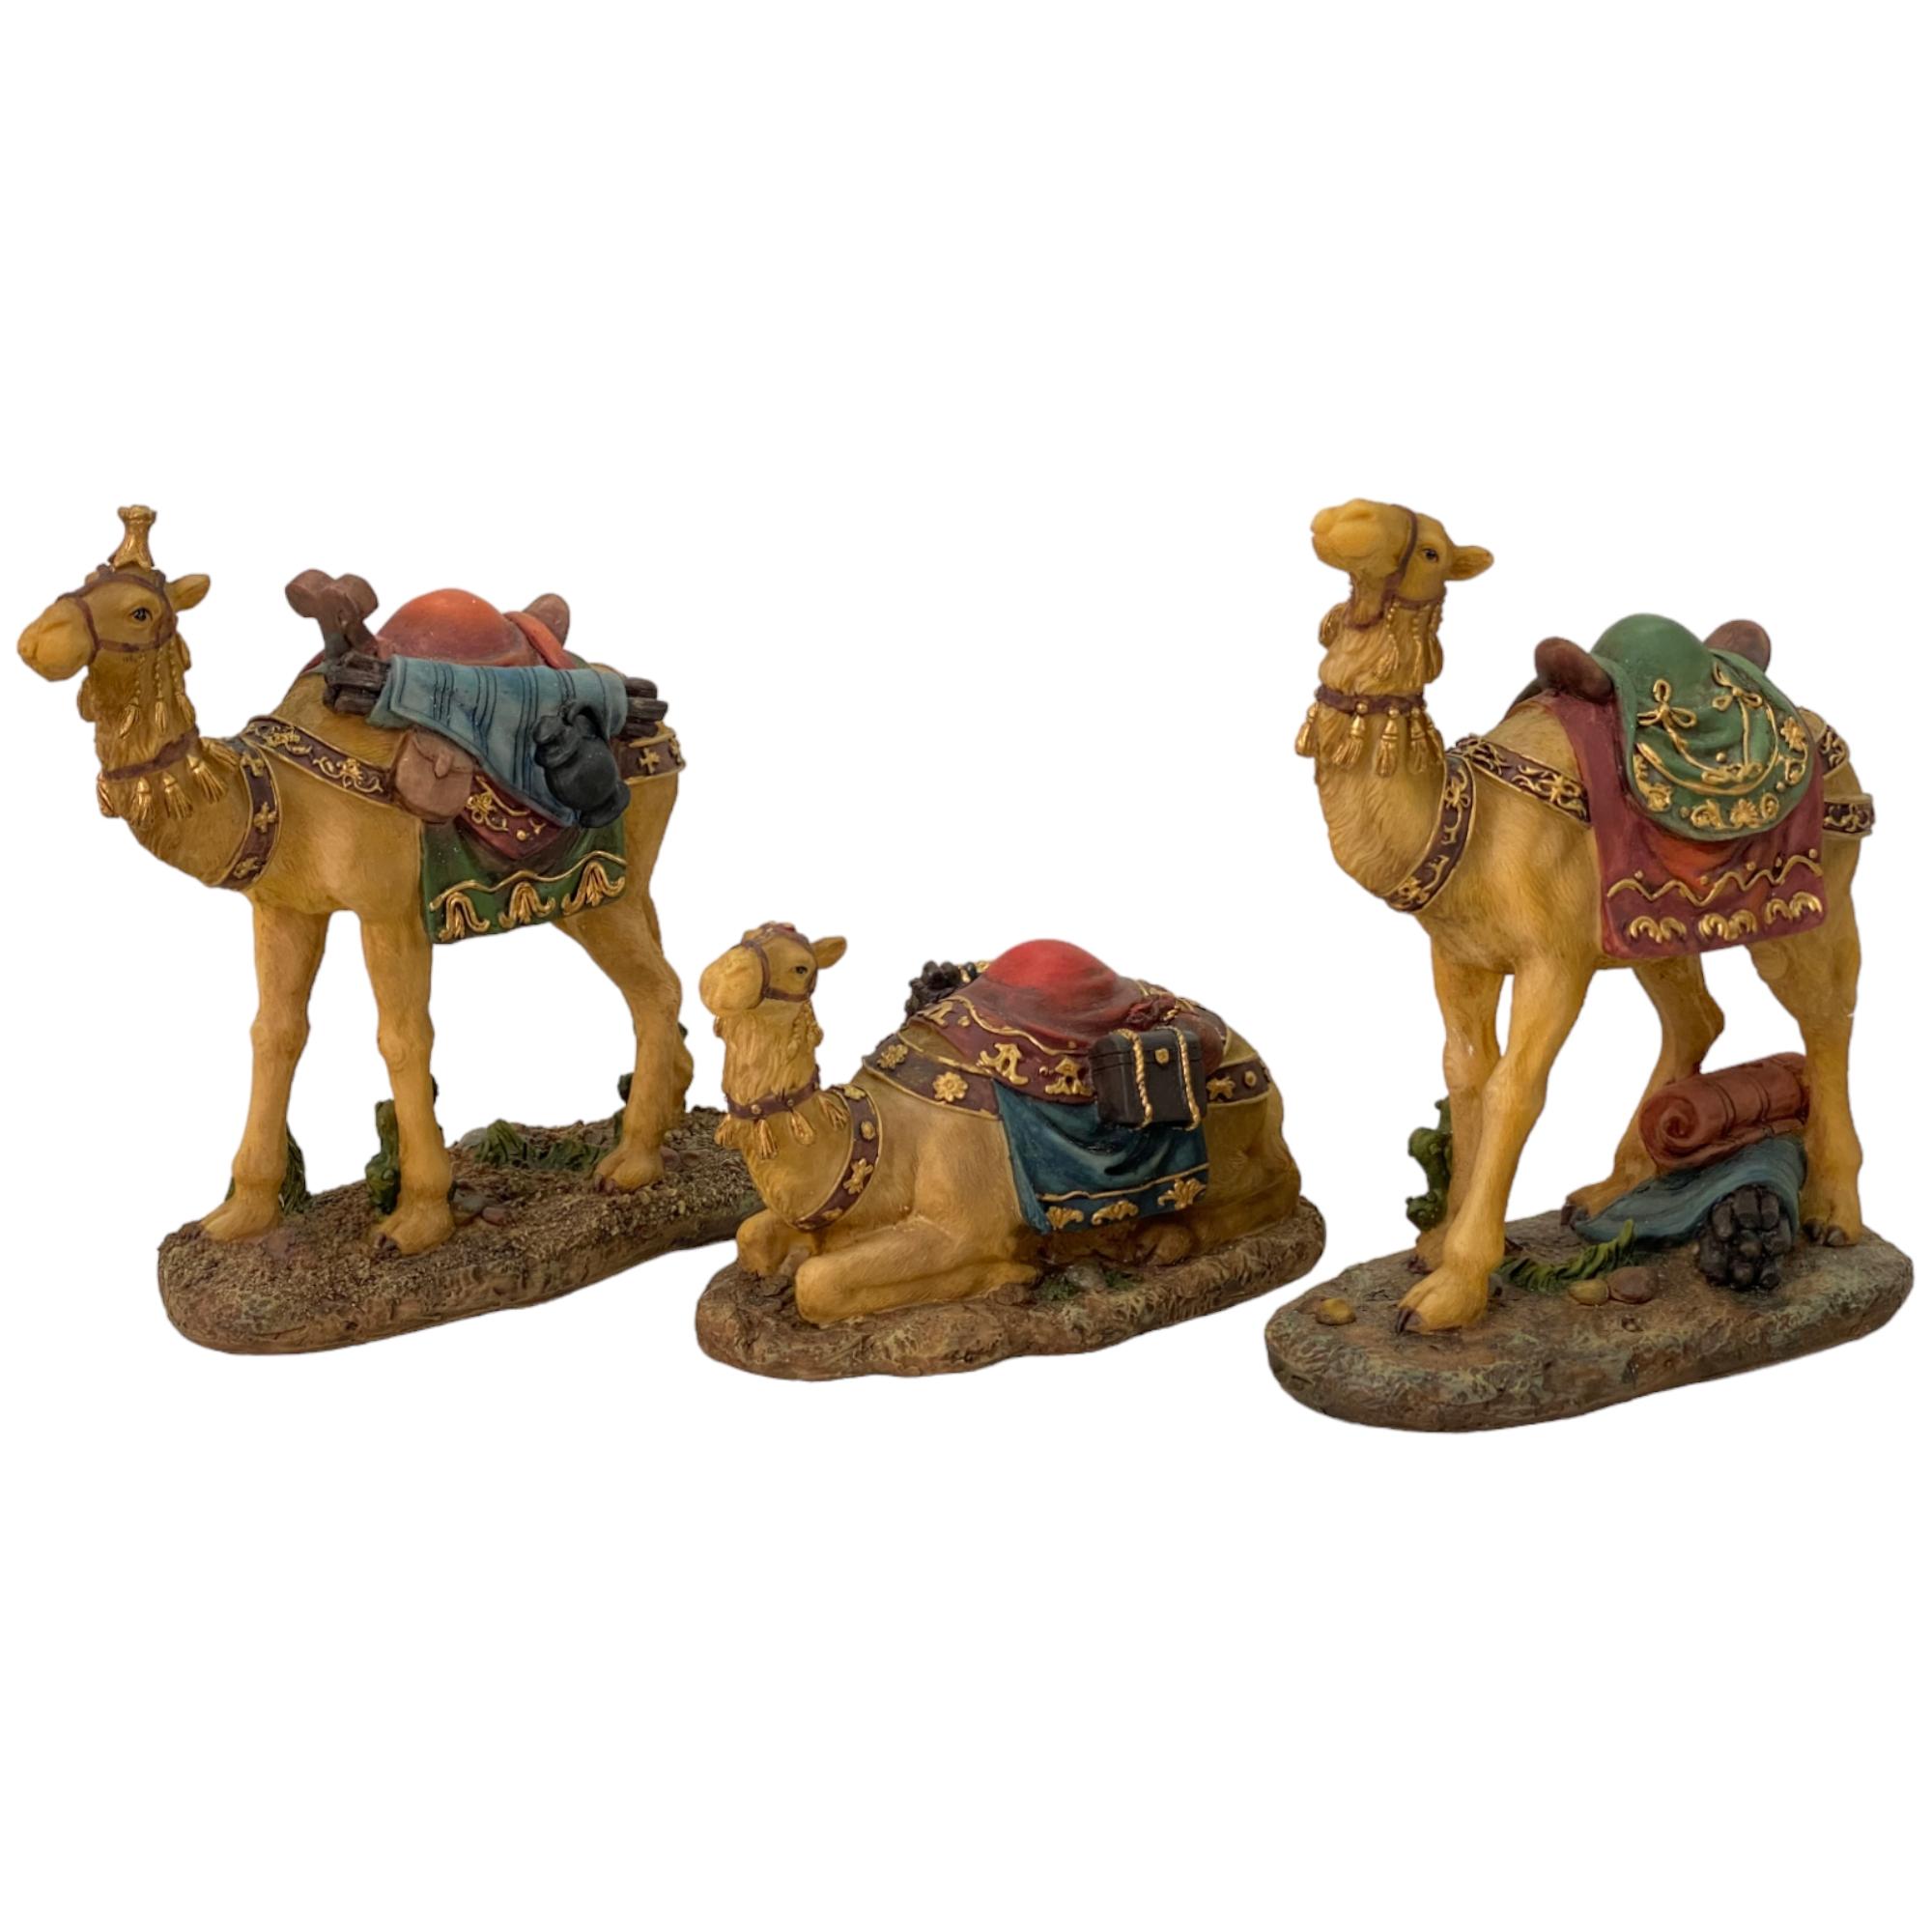 POLY S/3 CAMELS DCOR - 100-0200110